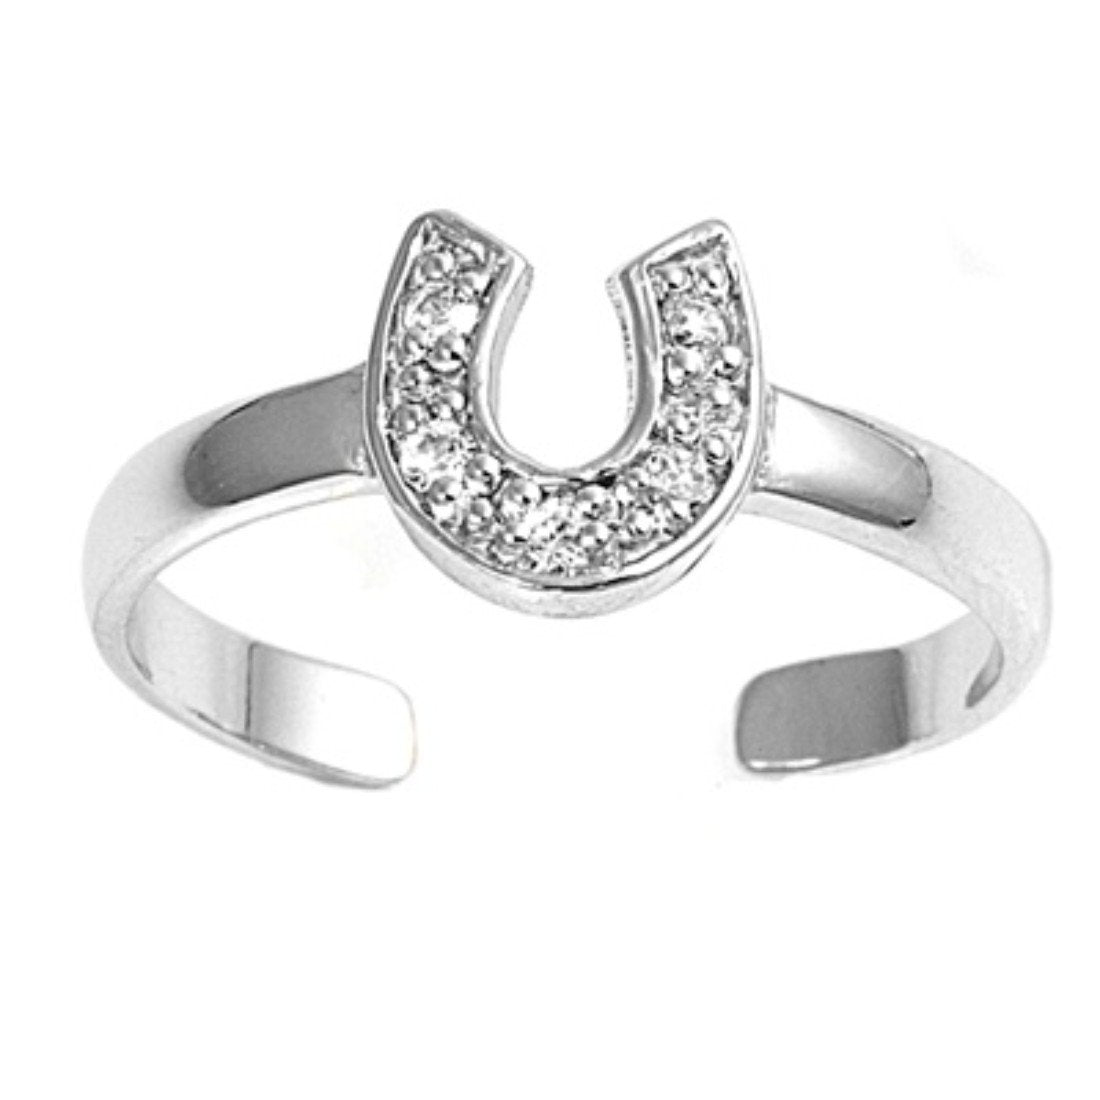 Silver Toe Ring Horse'S Shoe Simulated Cubic Zirconia Adjustable 925 Sterling Silver (7mm)